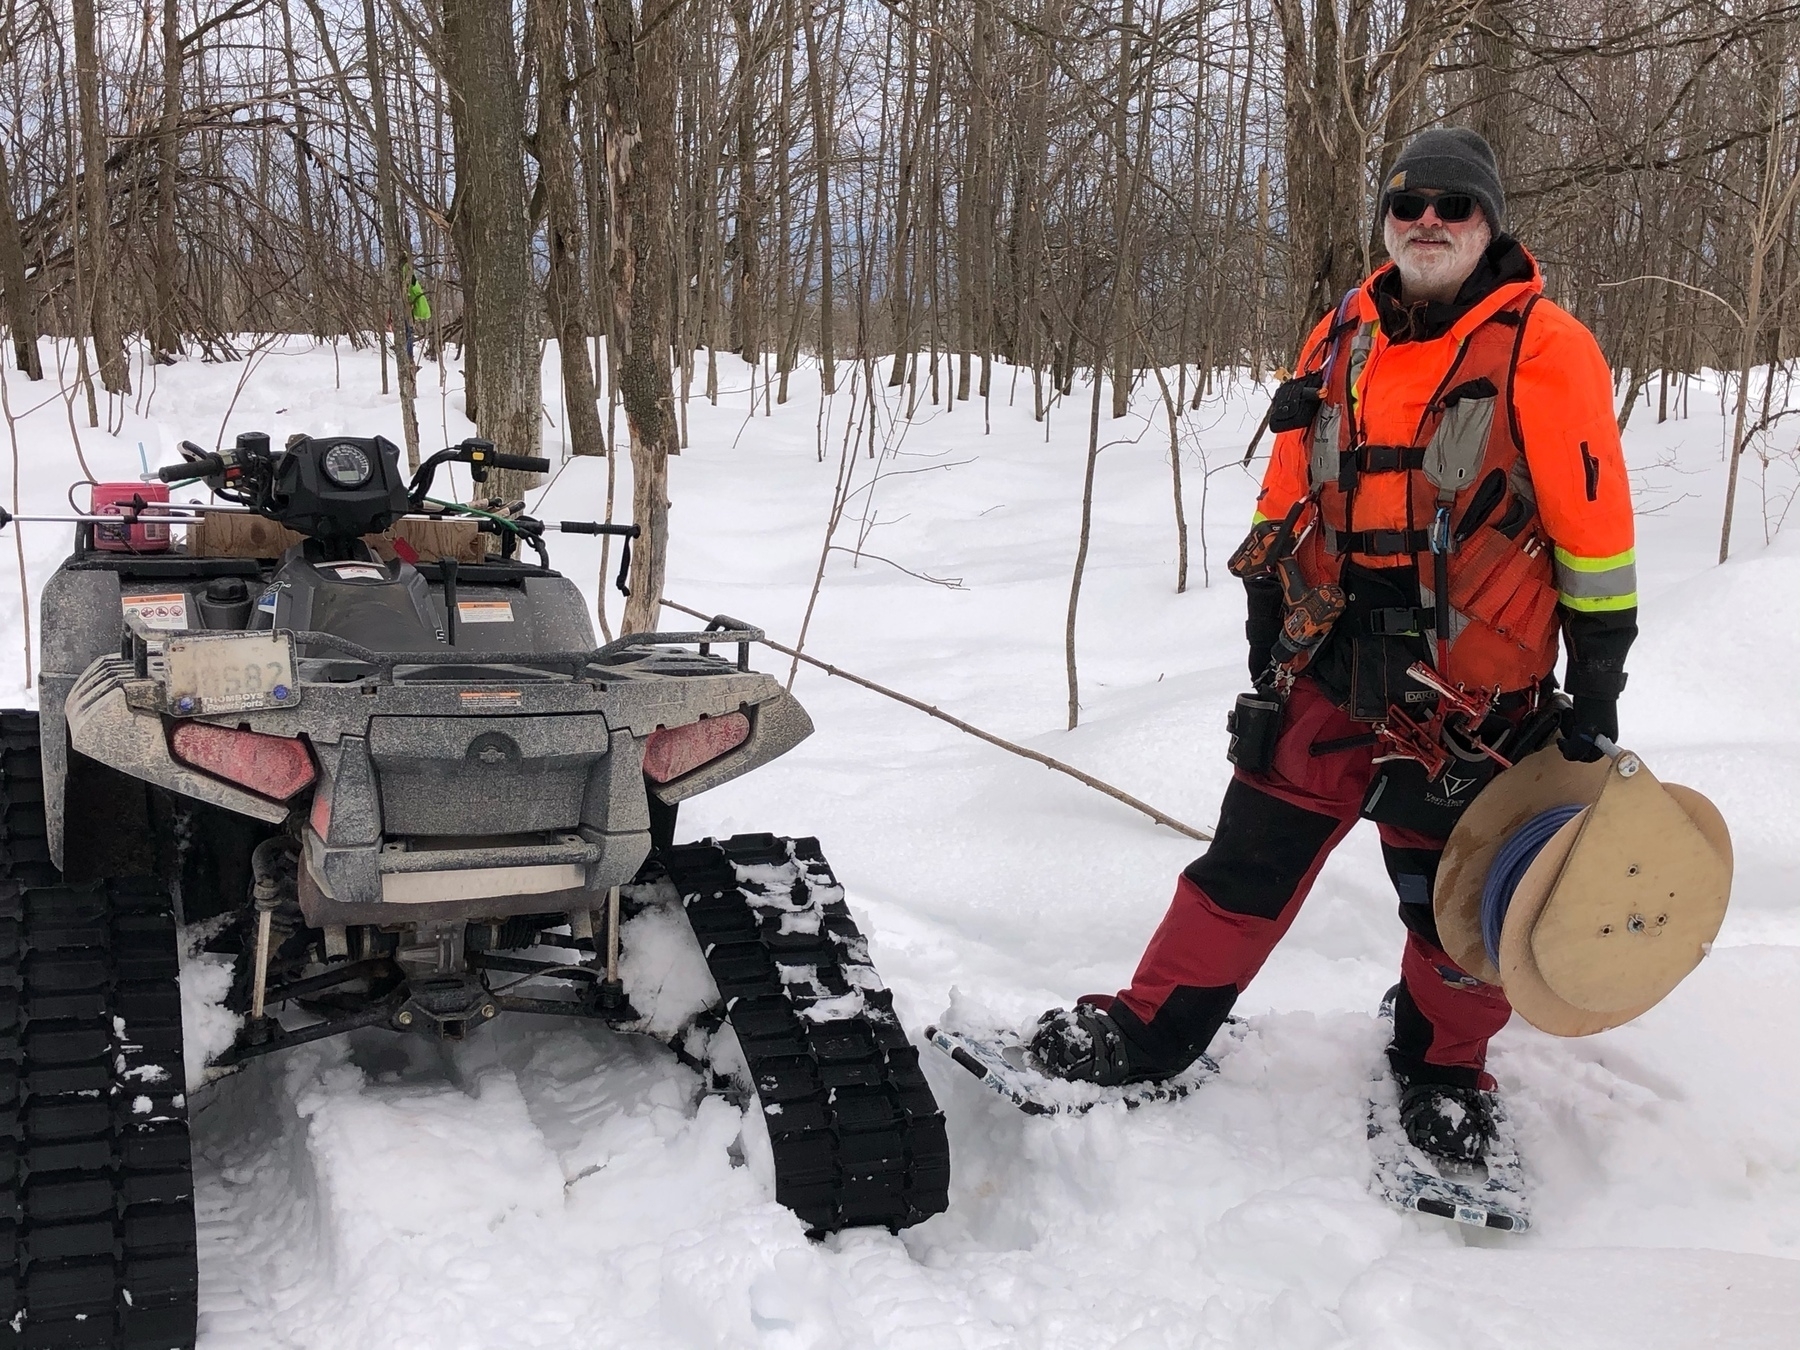 bearded man in fluorescent vest, red pants and snowshoes. he is wearing a toque and gloves and standing beside an atv with tracks. the ground is snow covered and he is surrounded by small trees 